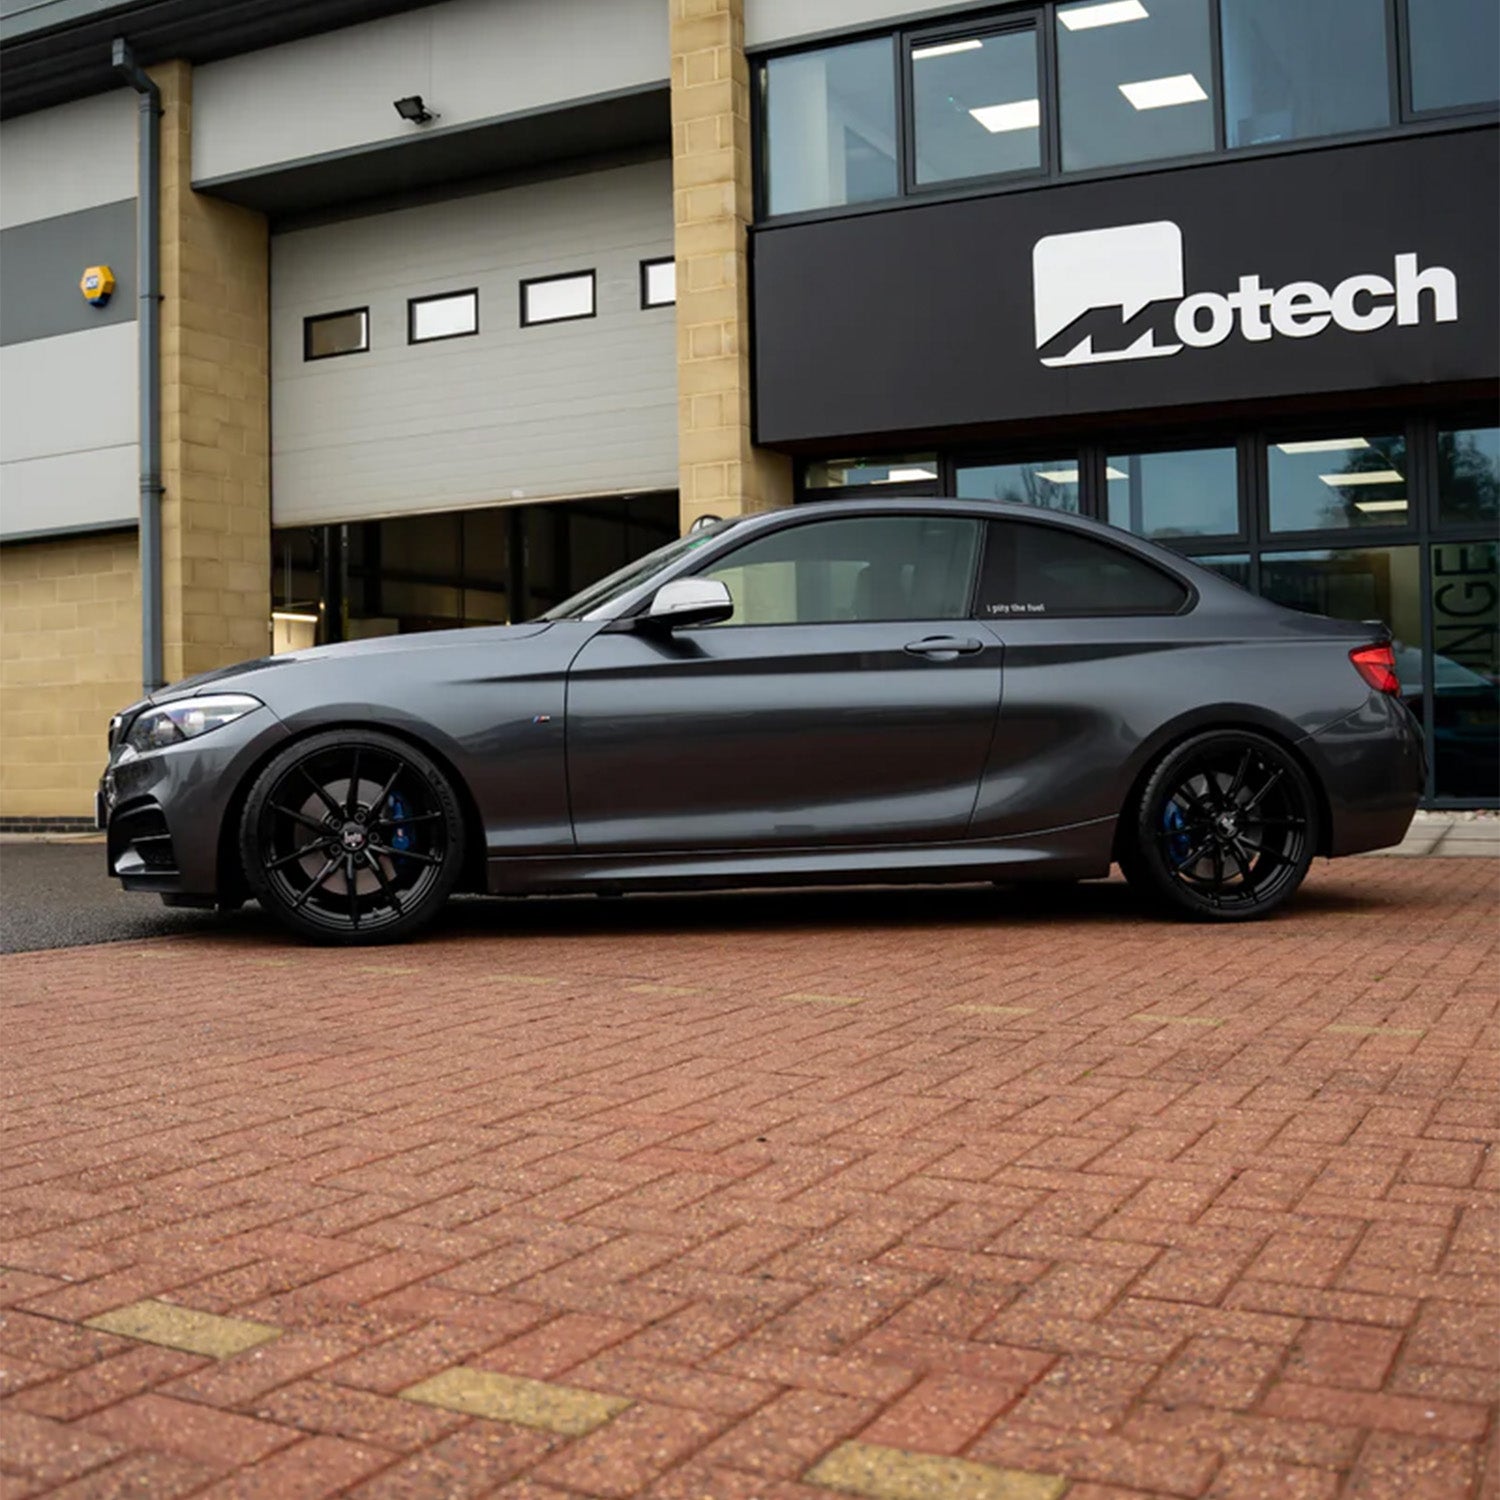 Eibach BMW F22 M235i & M240i Motech Stance+ Lowering Springs Fitted